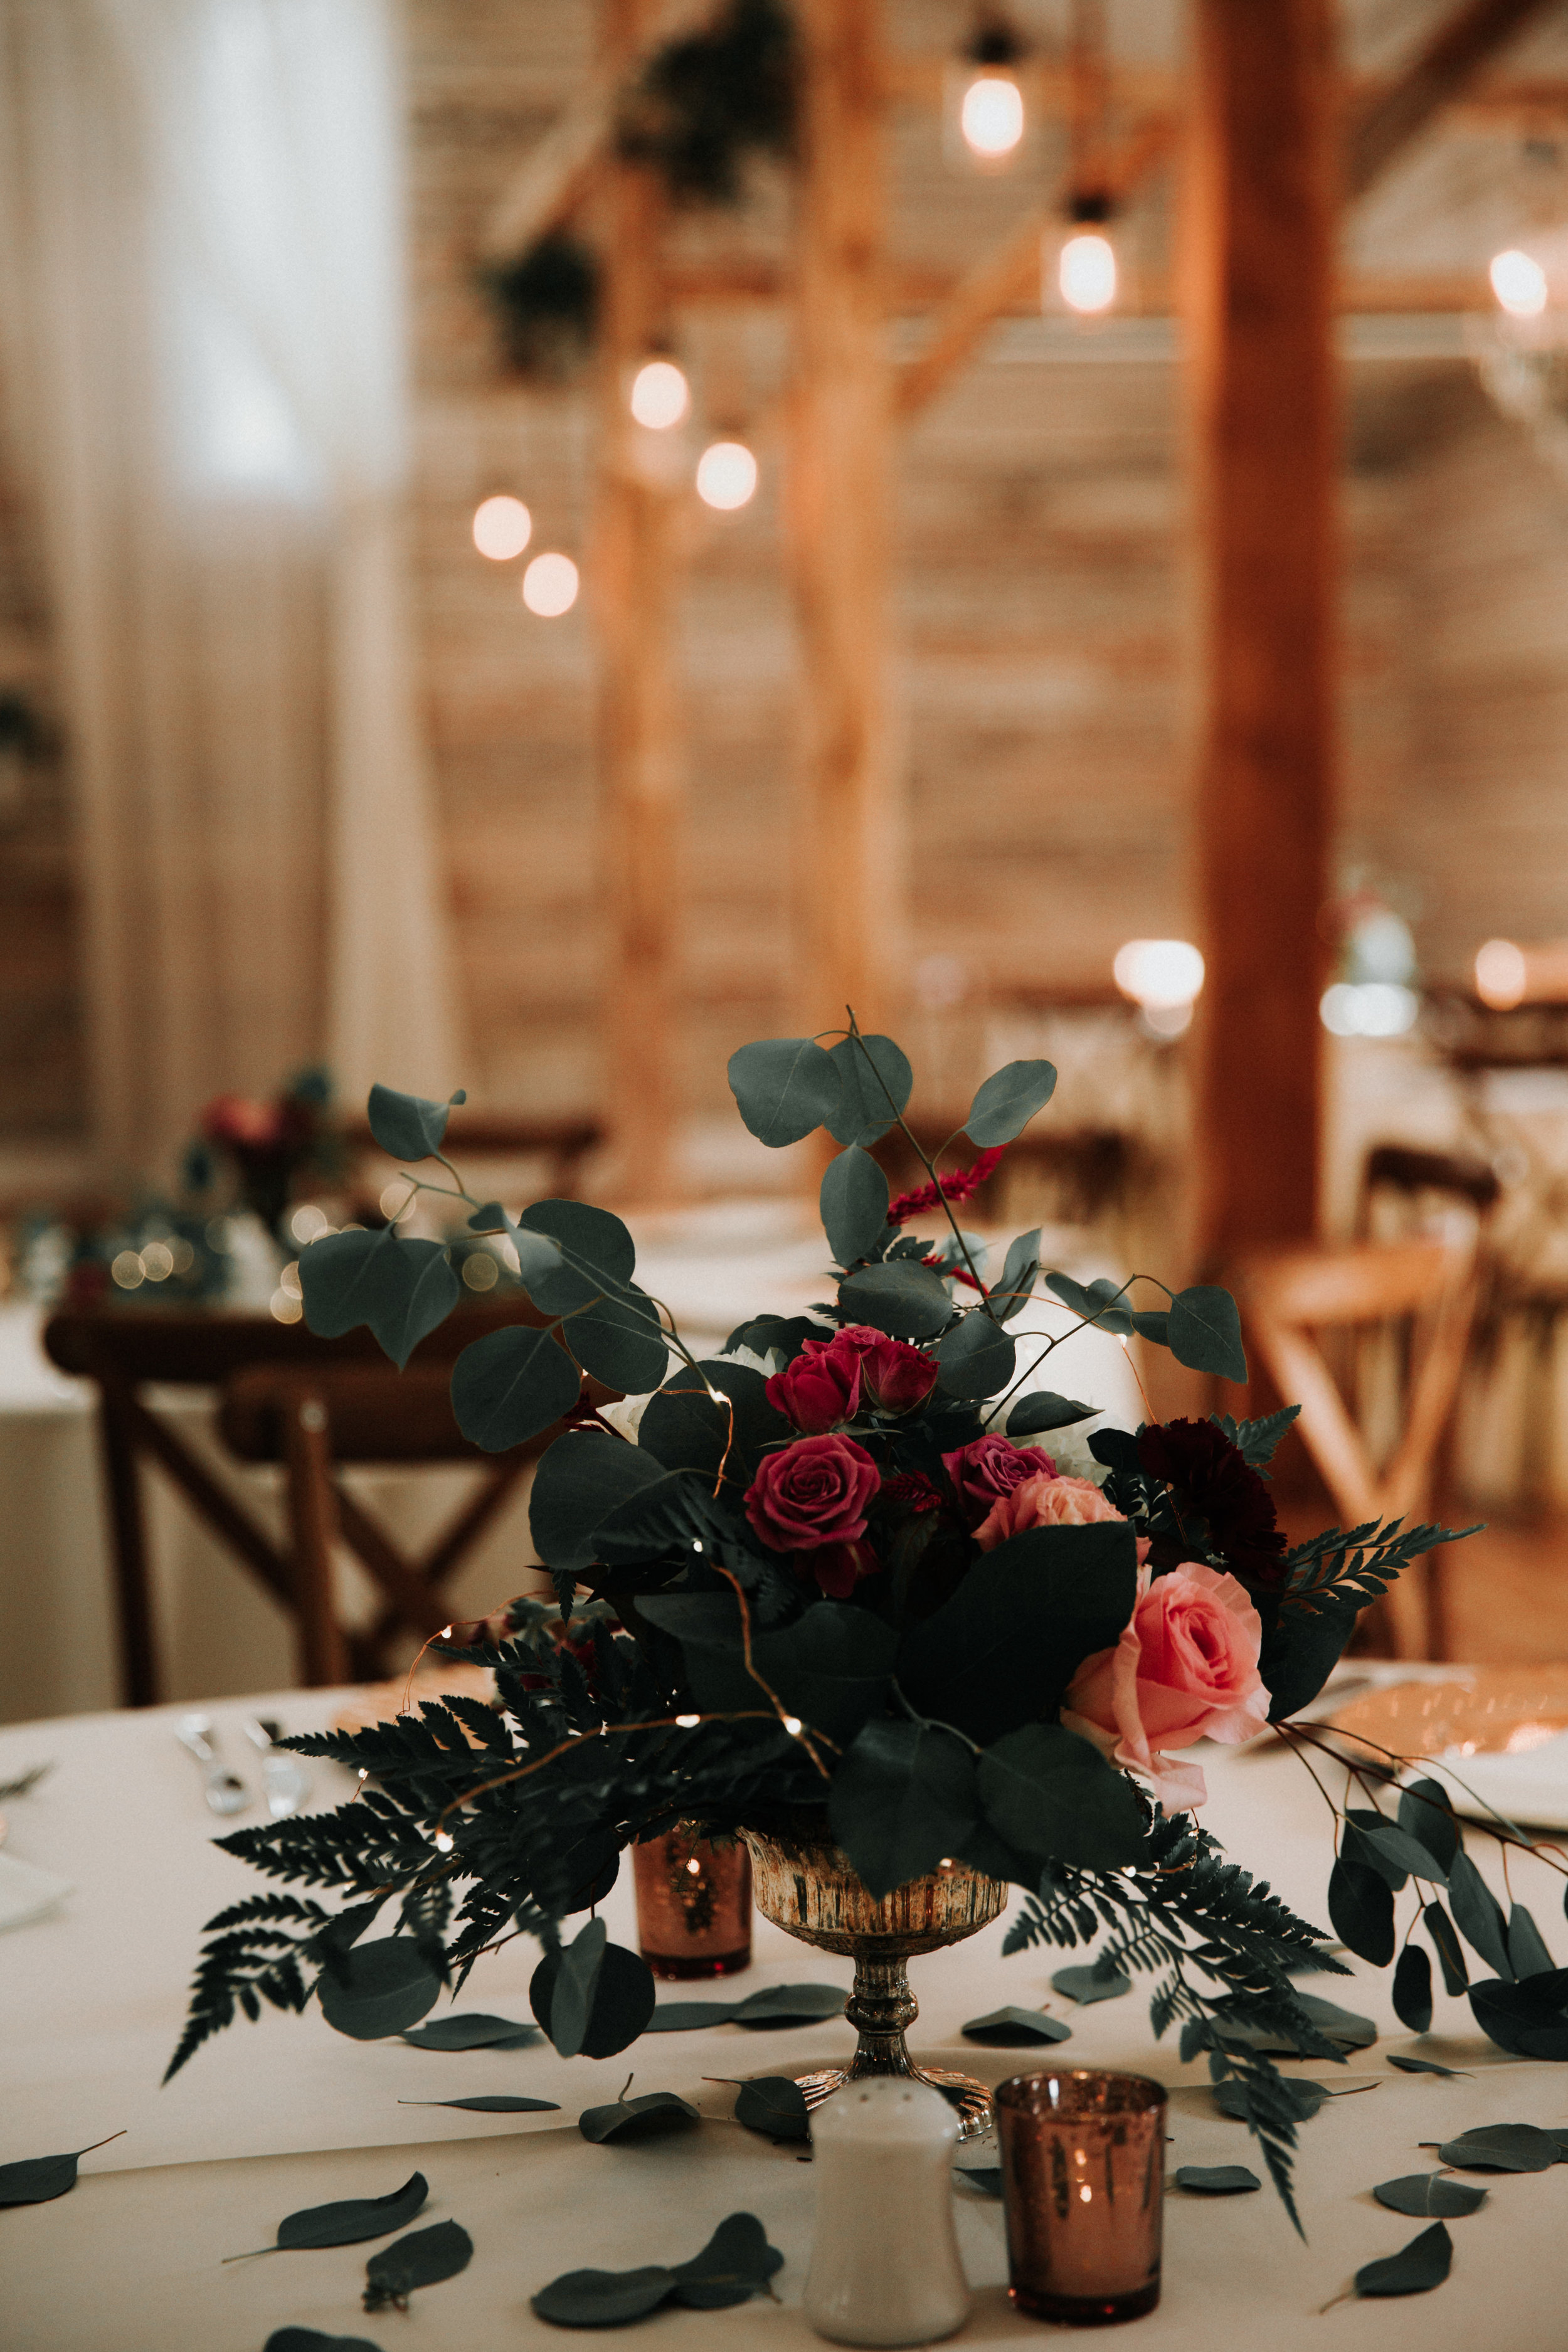 Gorgeous Floral Wedding Centerpieces - Athens, Tennessee Barn Wedding -- The Overwhelmed Bride Wedding Blog